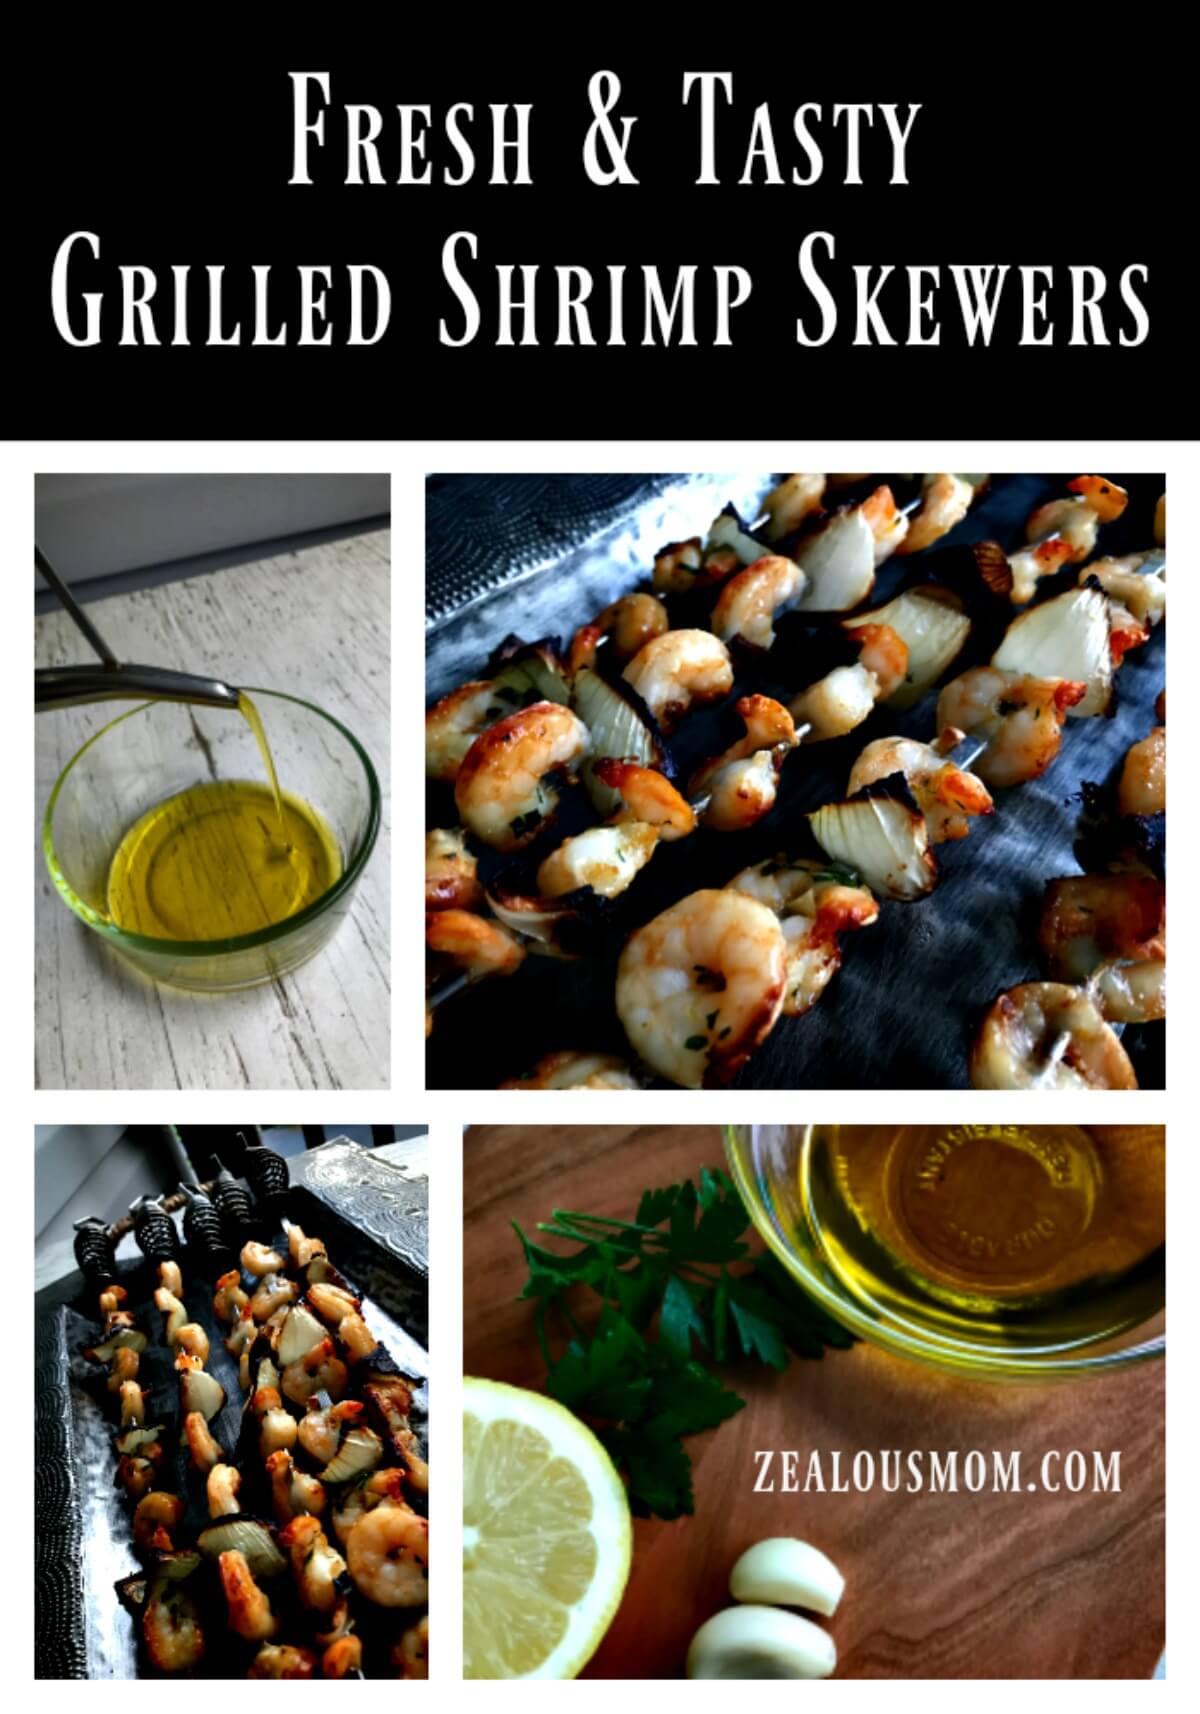 Start your summer right with grilled shrimp skewers